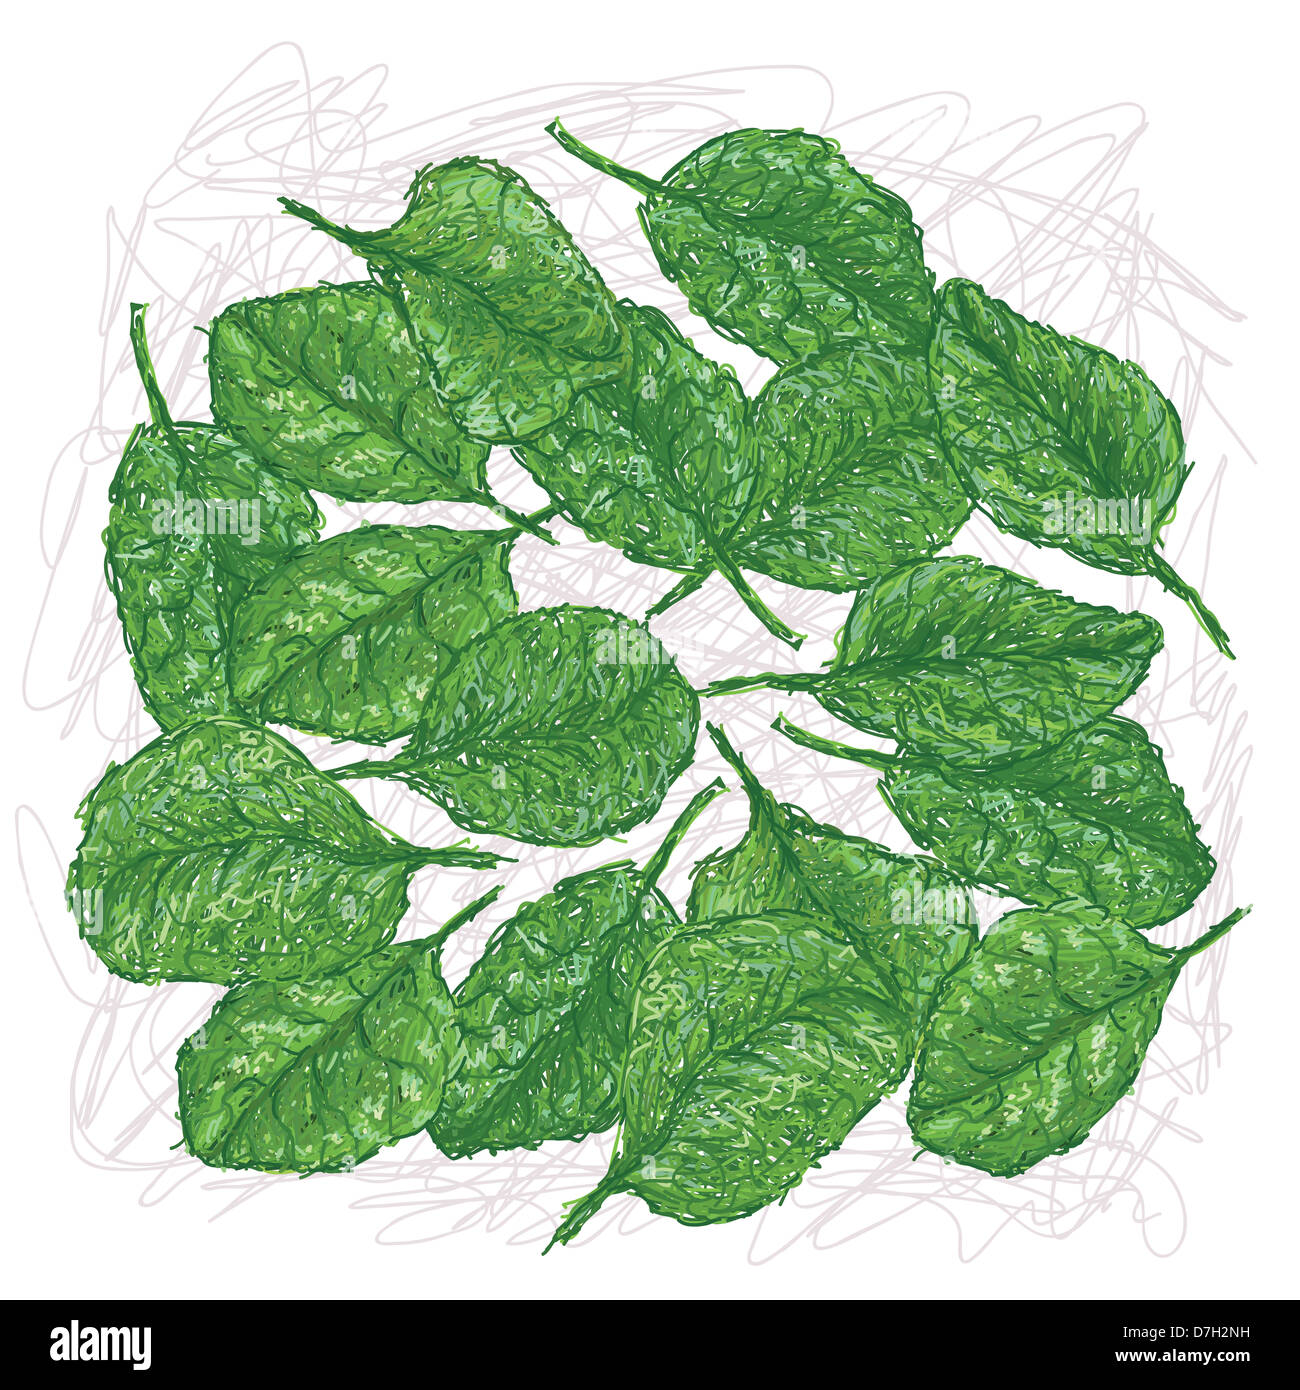 illustration of fresh spinach leaves isolated in white background. Stock Photo